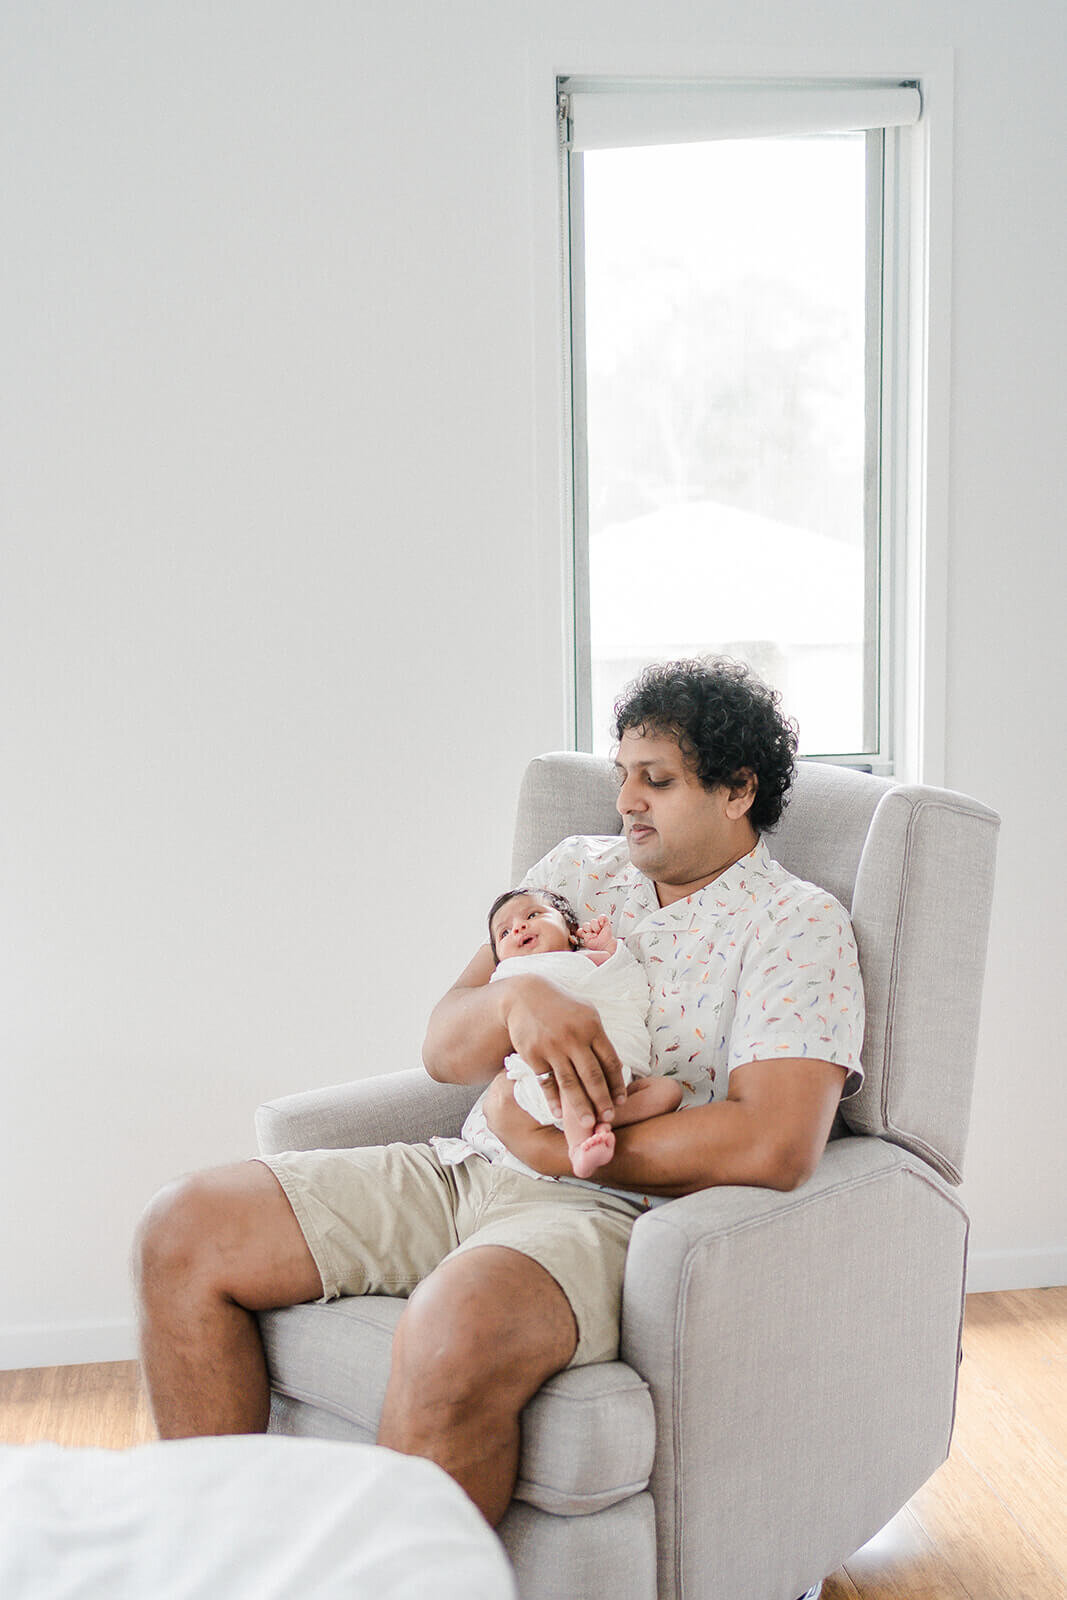 Intimate moments: dad and newborn captured in Gold Coast session at clients home.